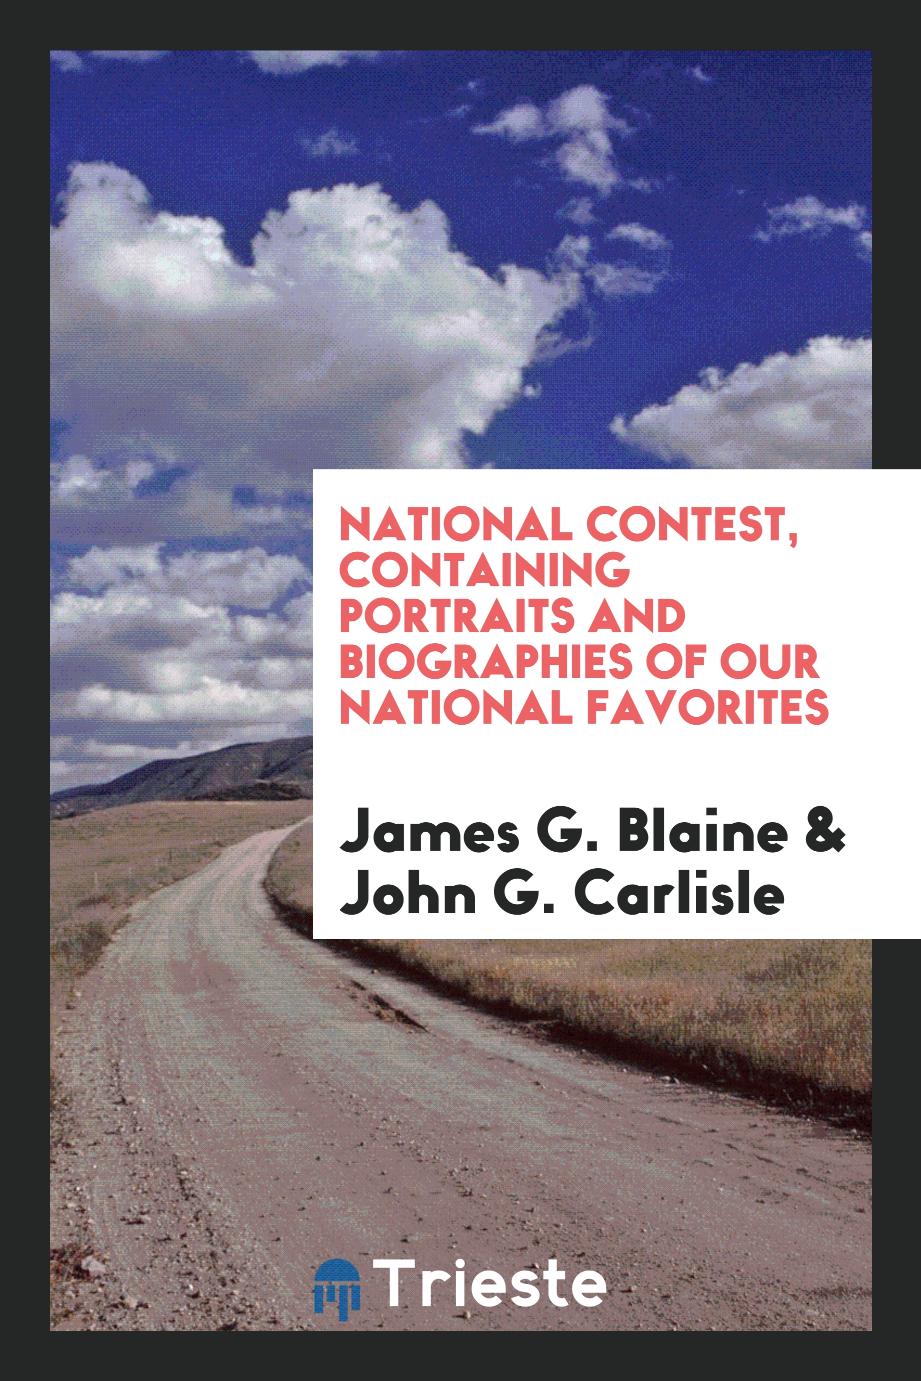 National Contest, Containing Portraits and Biographies of Our National Favorites